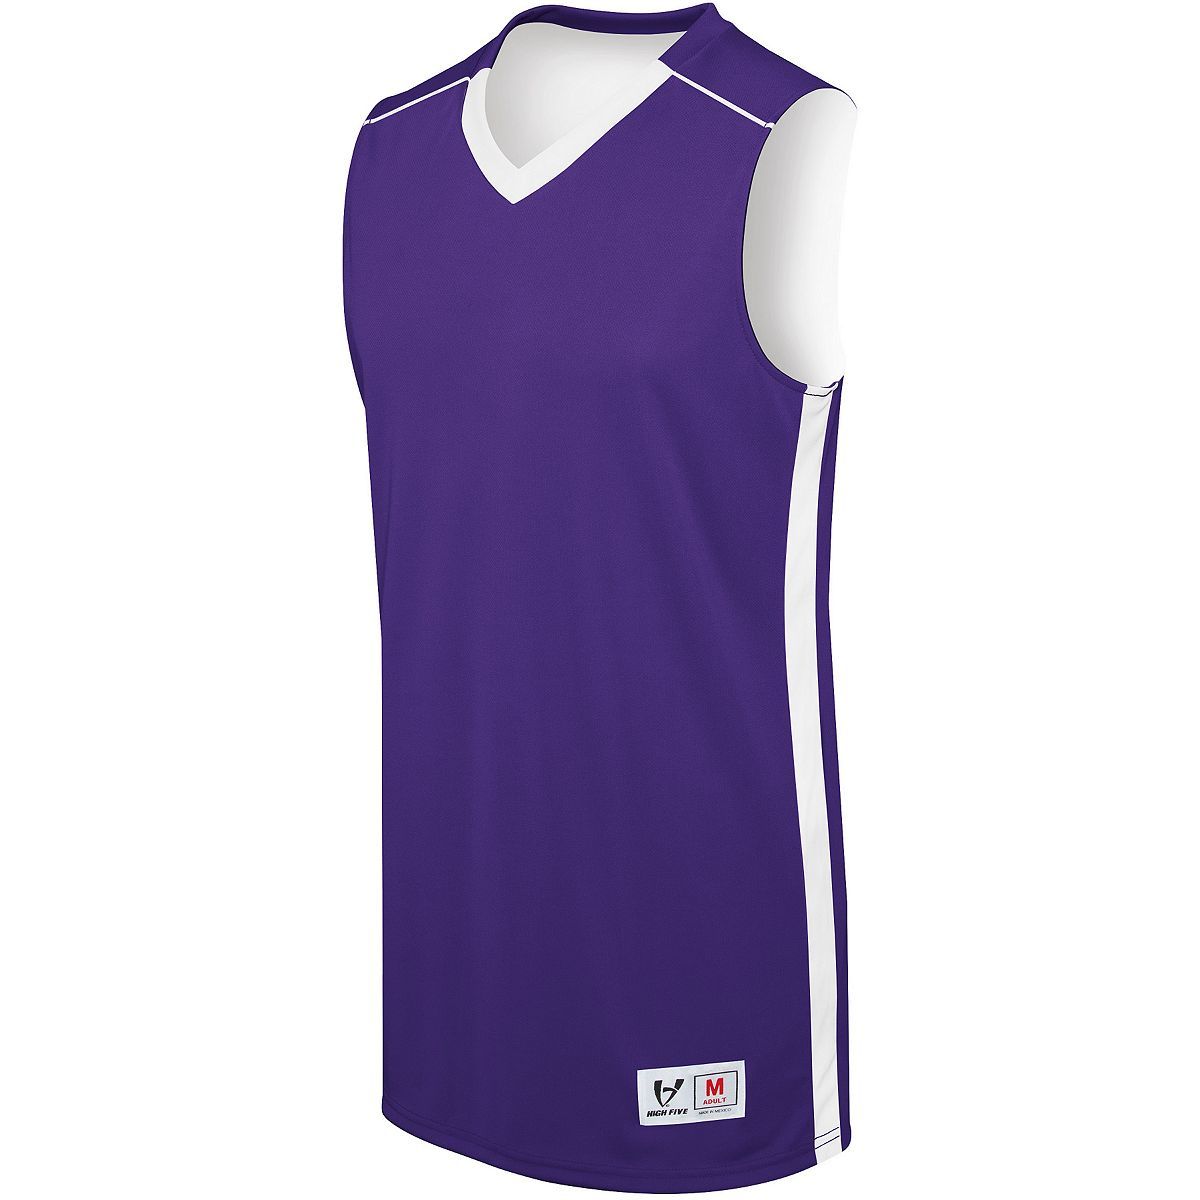 Augusta Sportswear Ladies Competition Reversible Jersey in Purple/White  -Part of the Ladies, Ladies-Jersey, Augusta-Products, Basketball, Shirts, All-Sports, All-Sports-1 product lines at KanaleyCreations.com